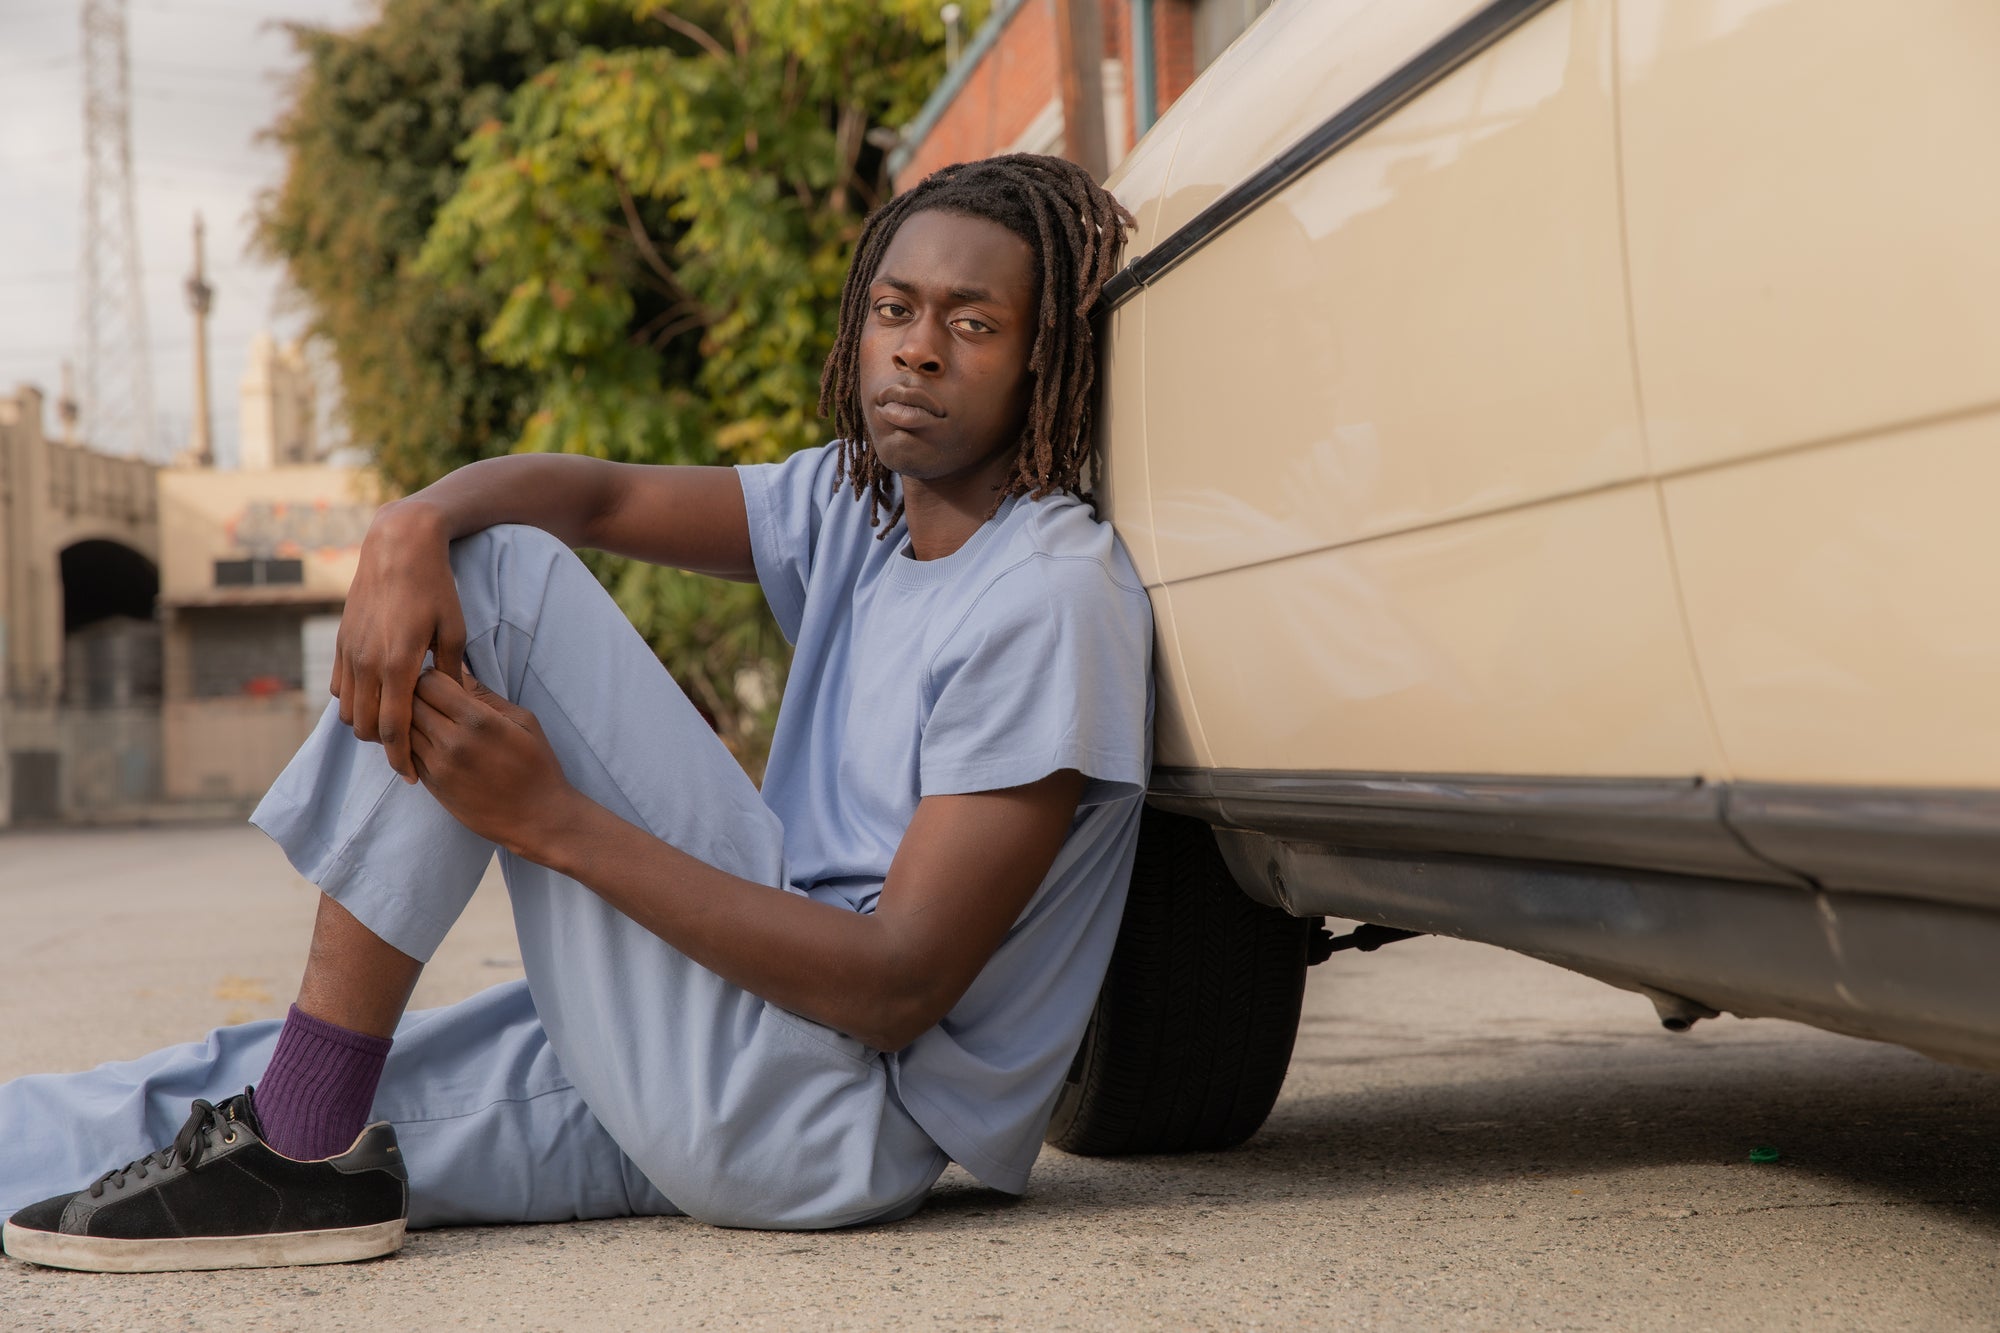 Malcom is wearing The Organic Vintage Tee in Periwinkle and Heavyweight Trousers in Periwinkle